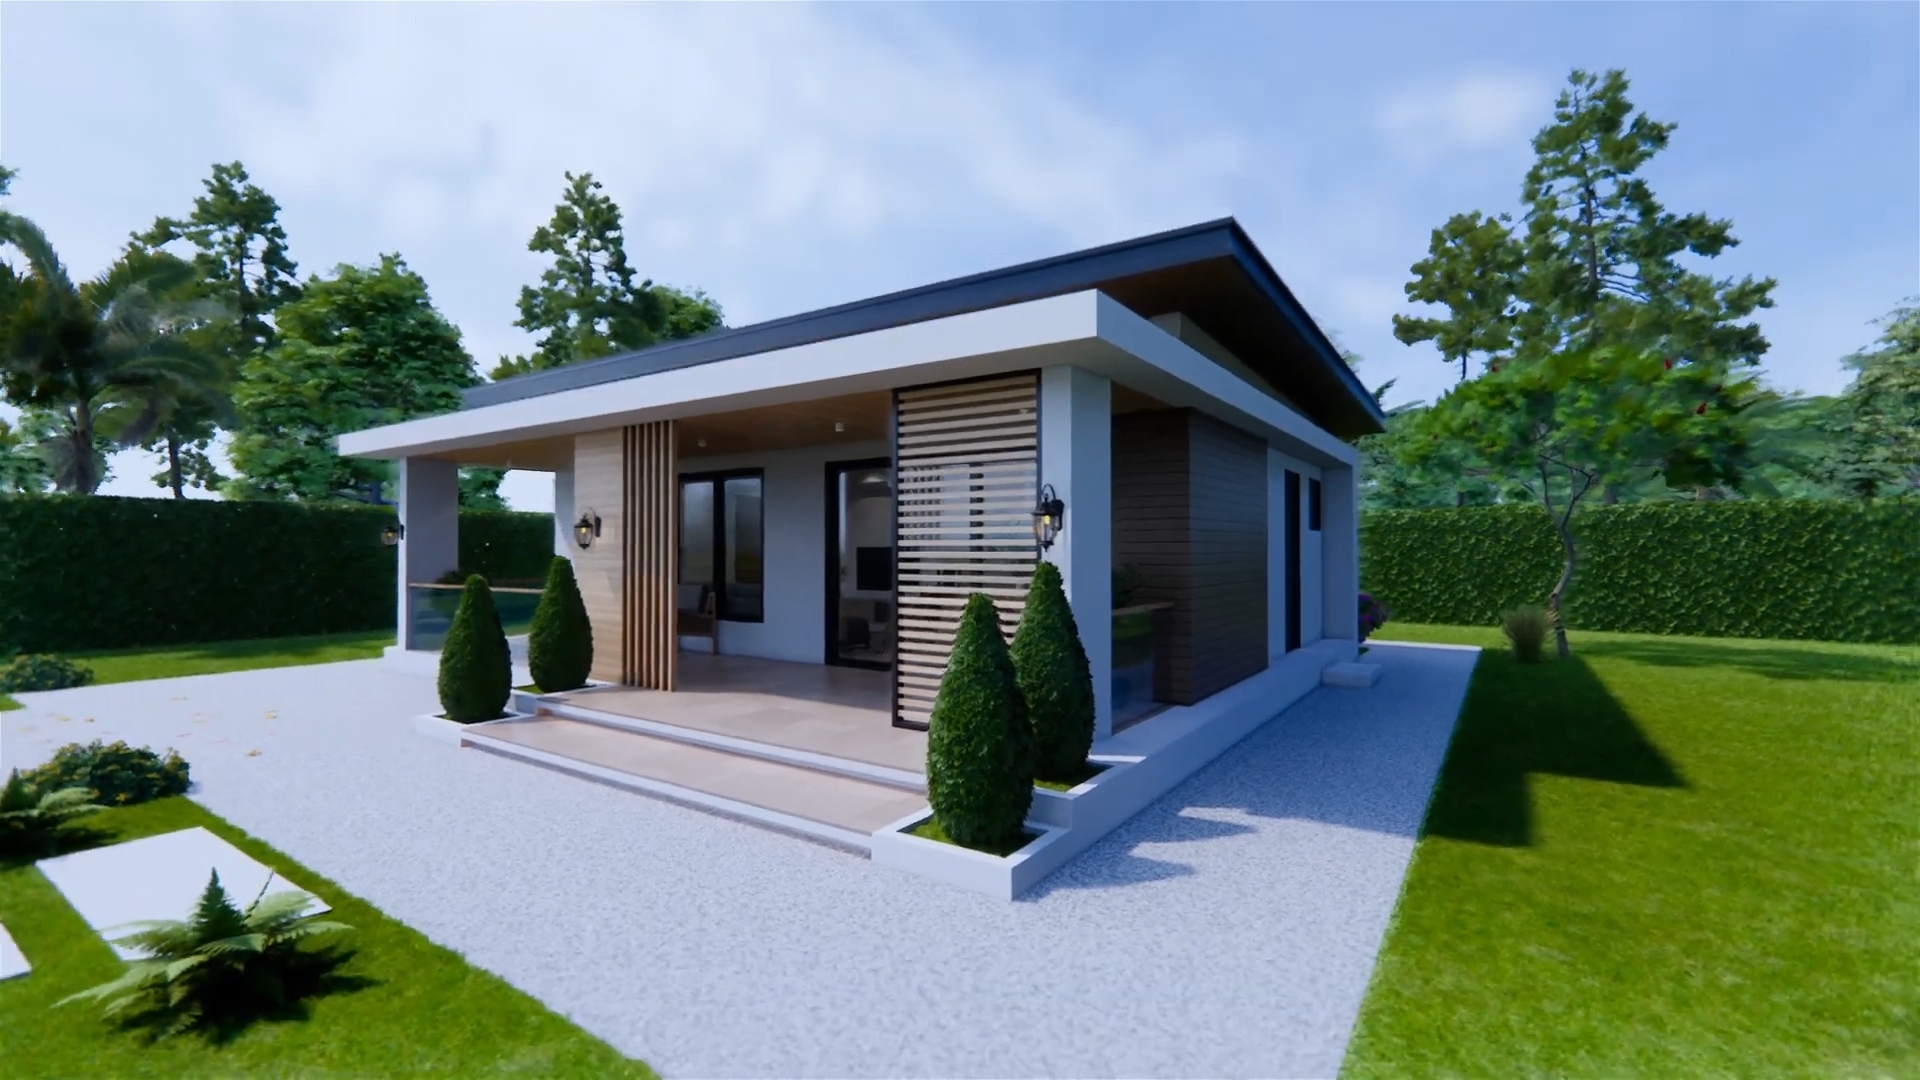 30x26 Beautiful Small House 6x9 Meter 2 Beds 2 Bath